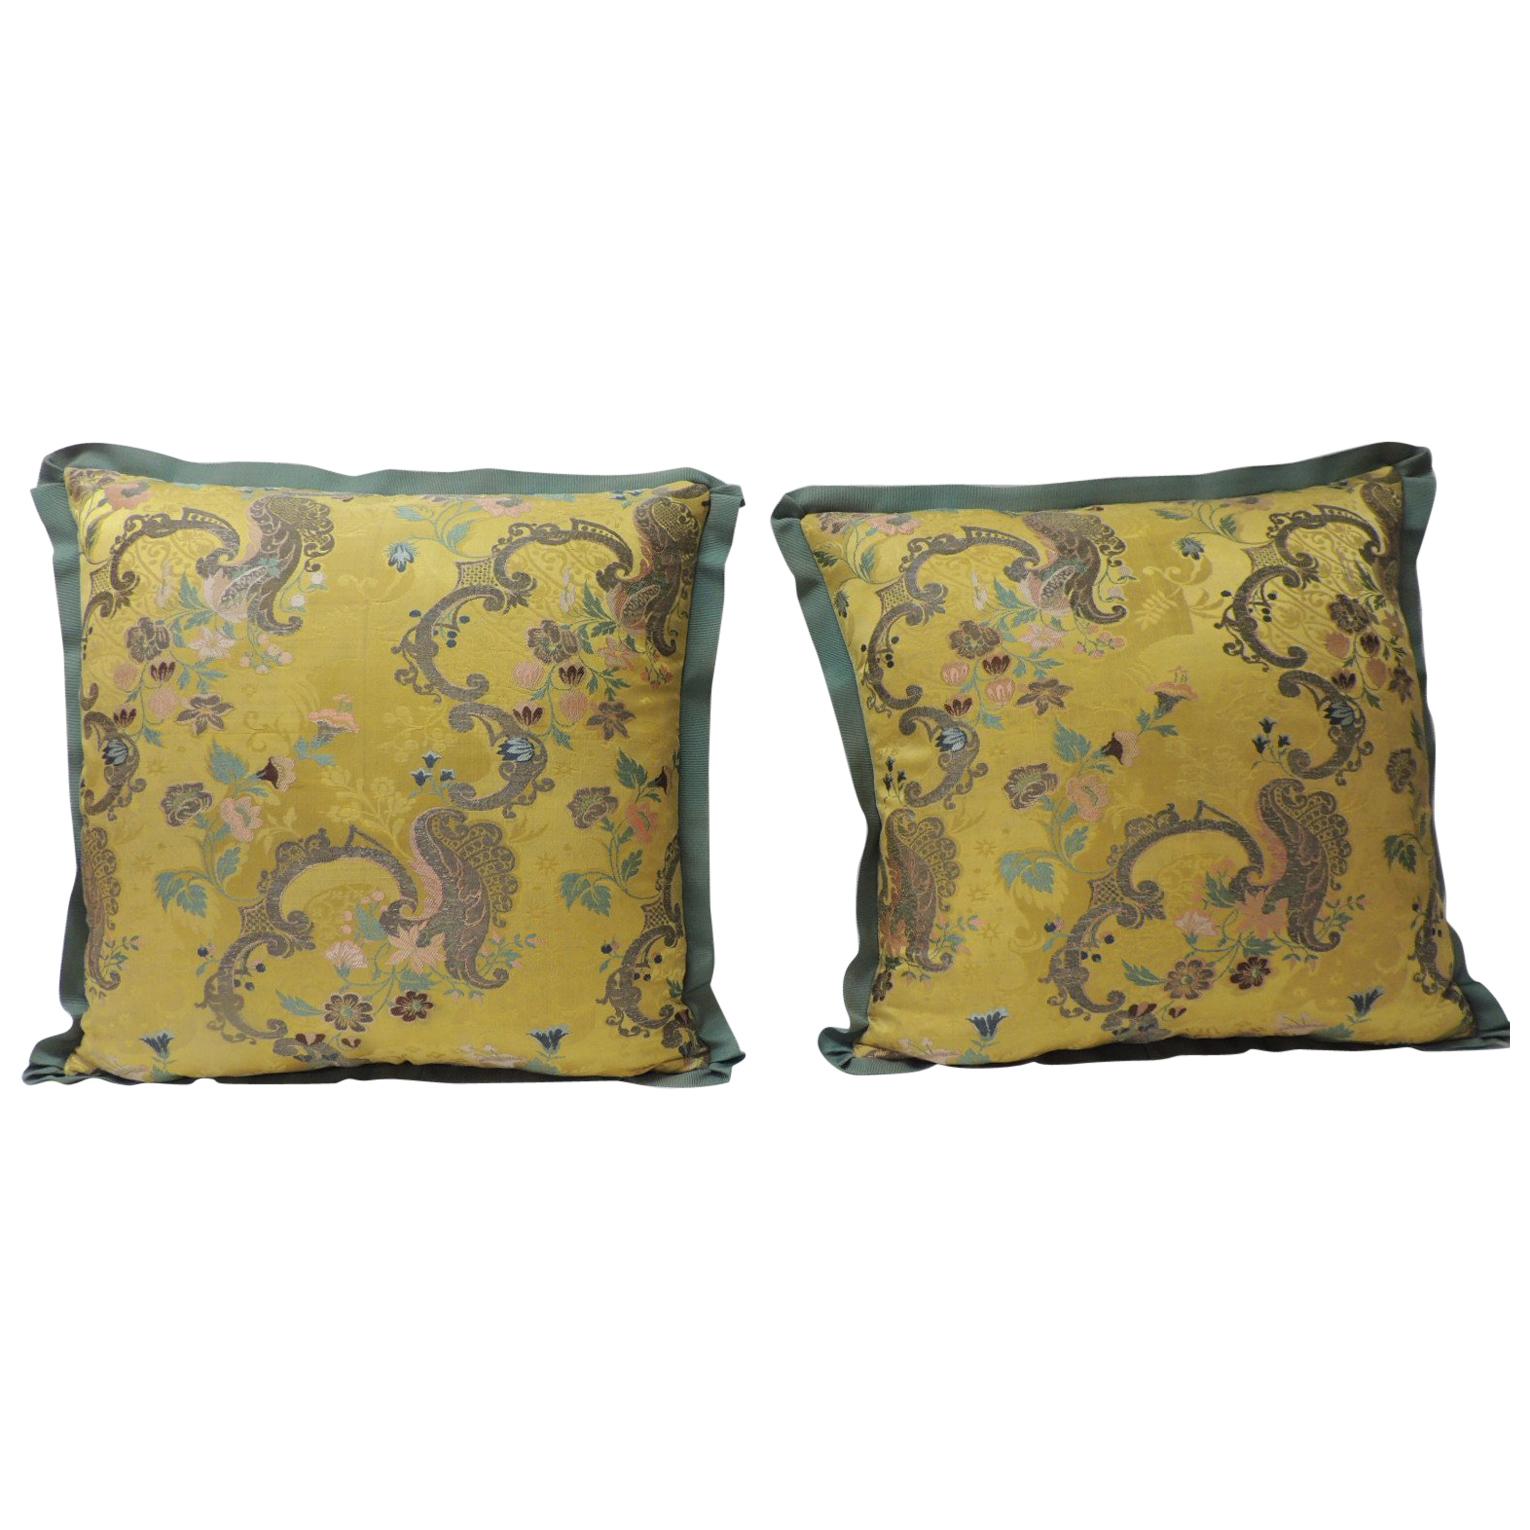 Pair of Antique Green and Gold Brocade French Silk Decorative Pillows